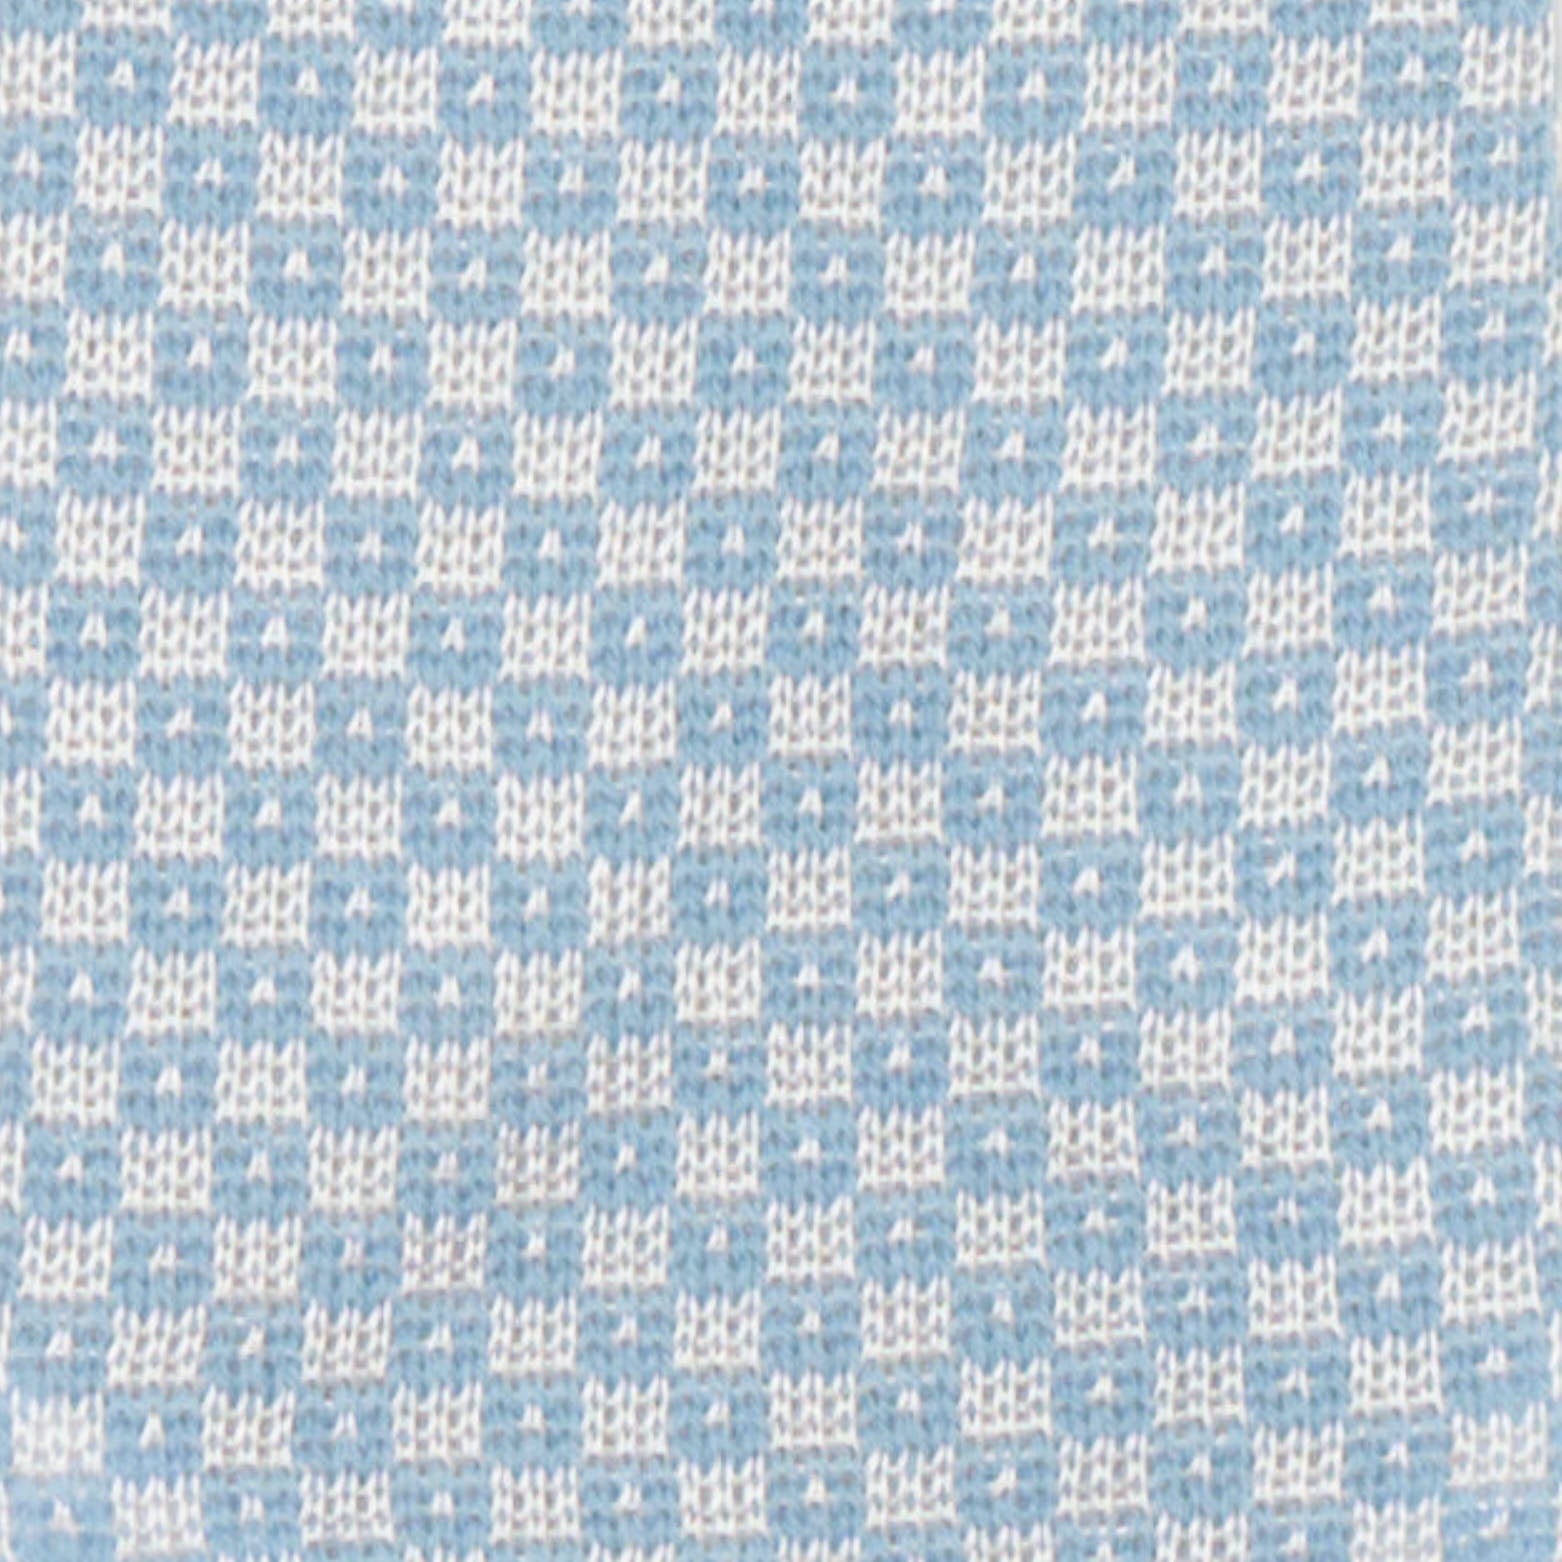 VANNUCCI MILANO Light Blue Checked Wool Knit Tie NEW